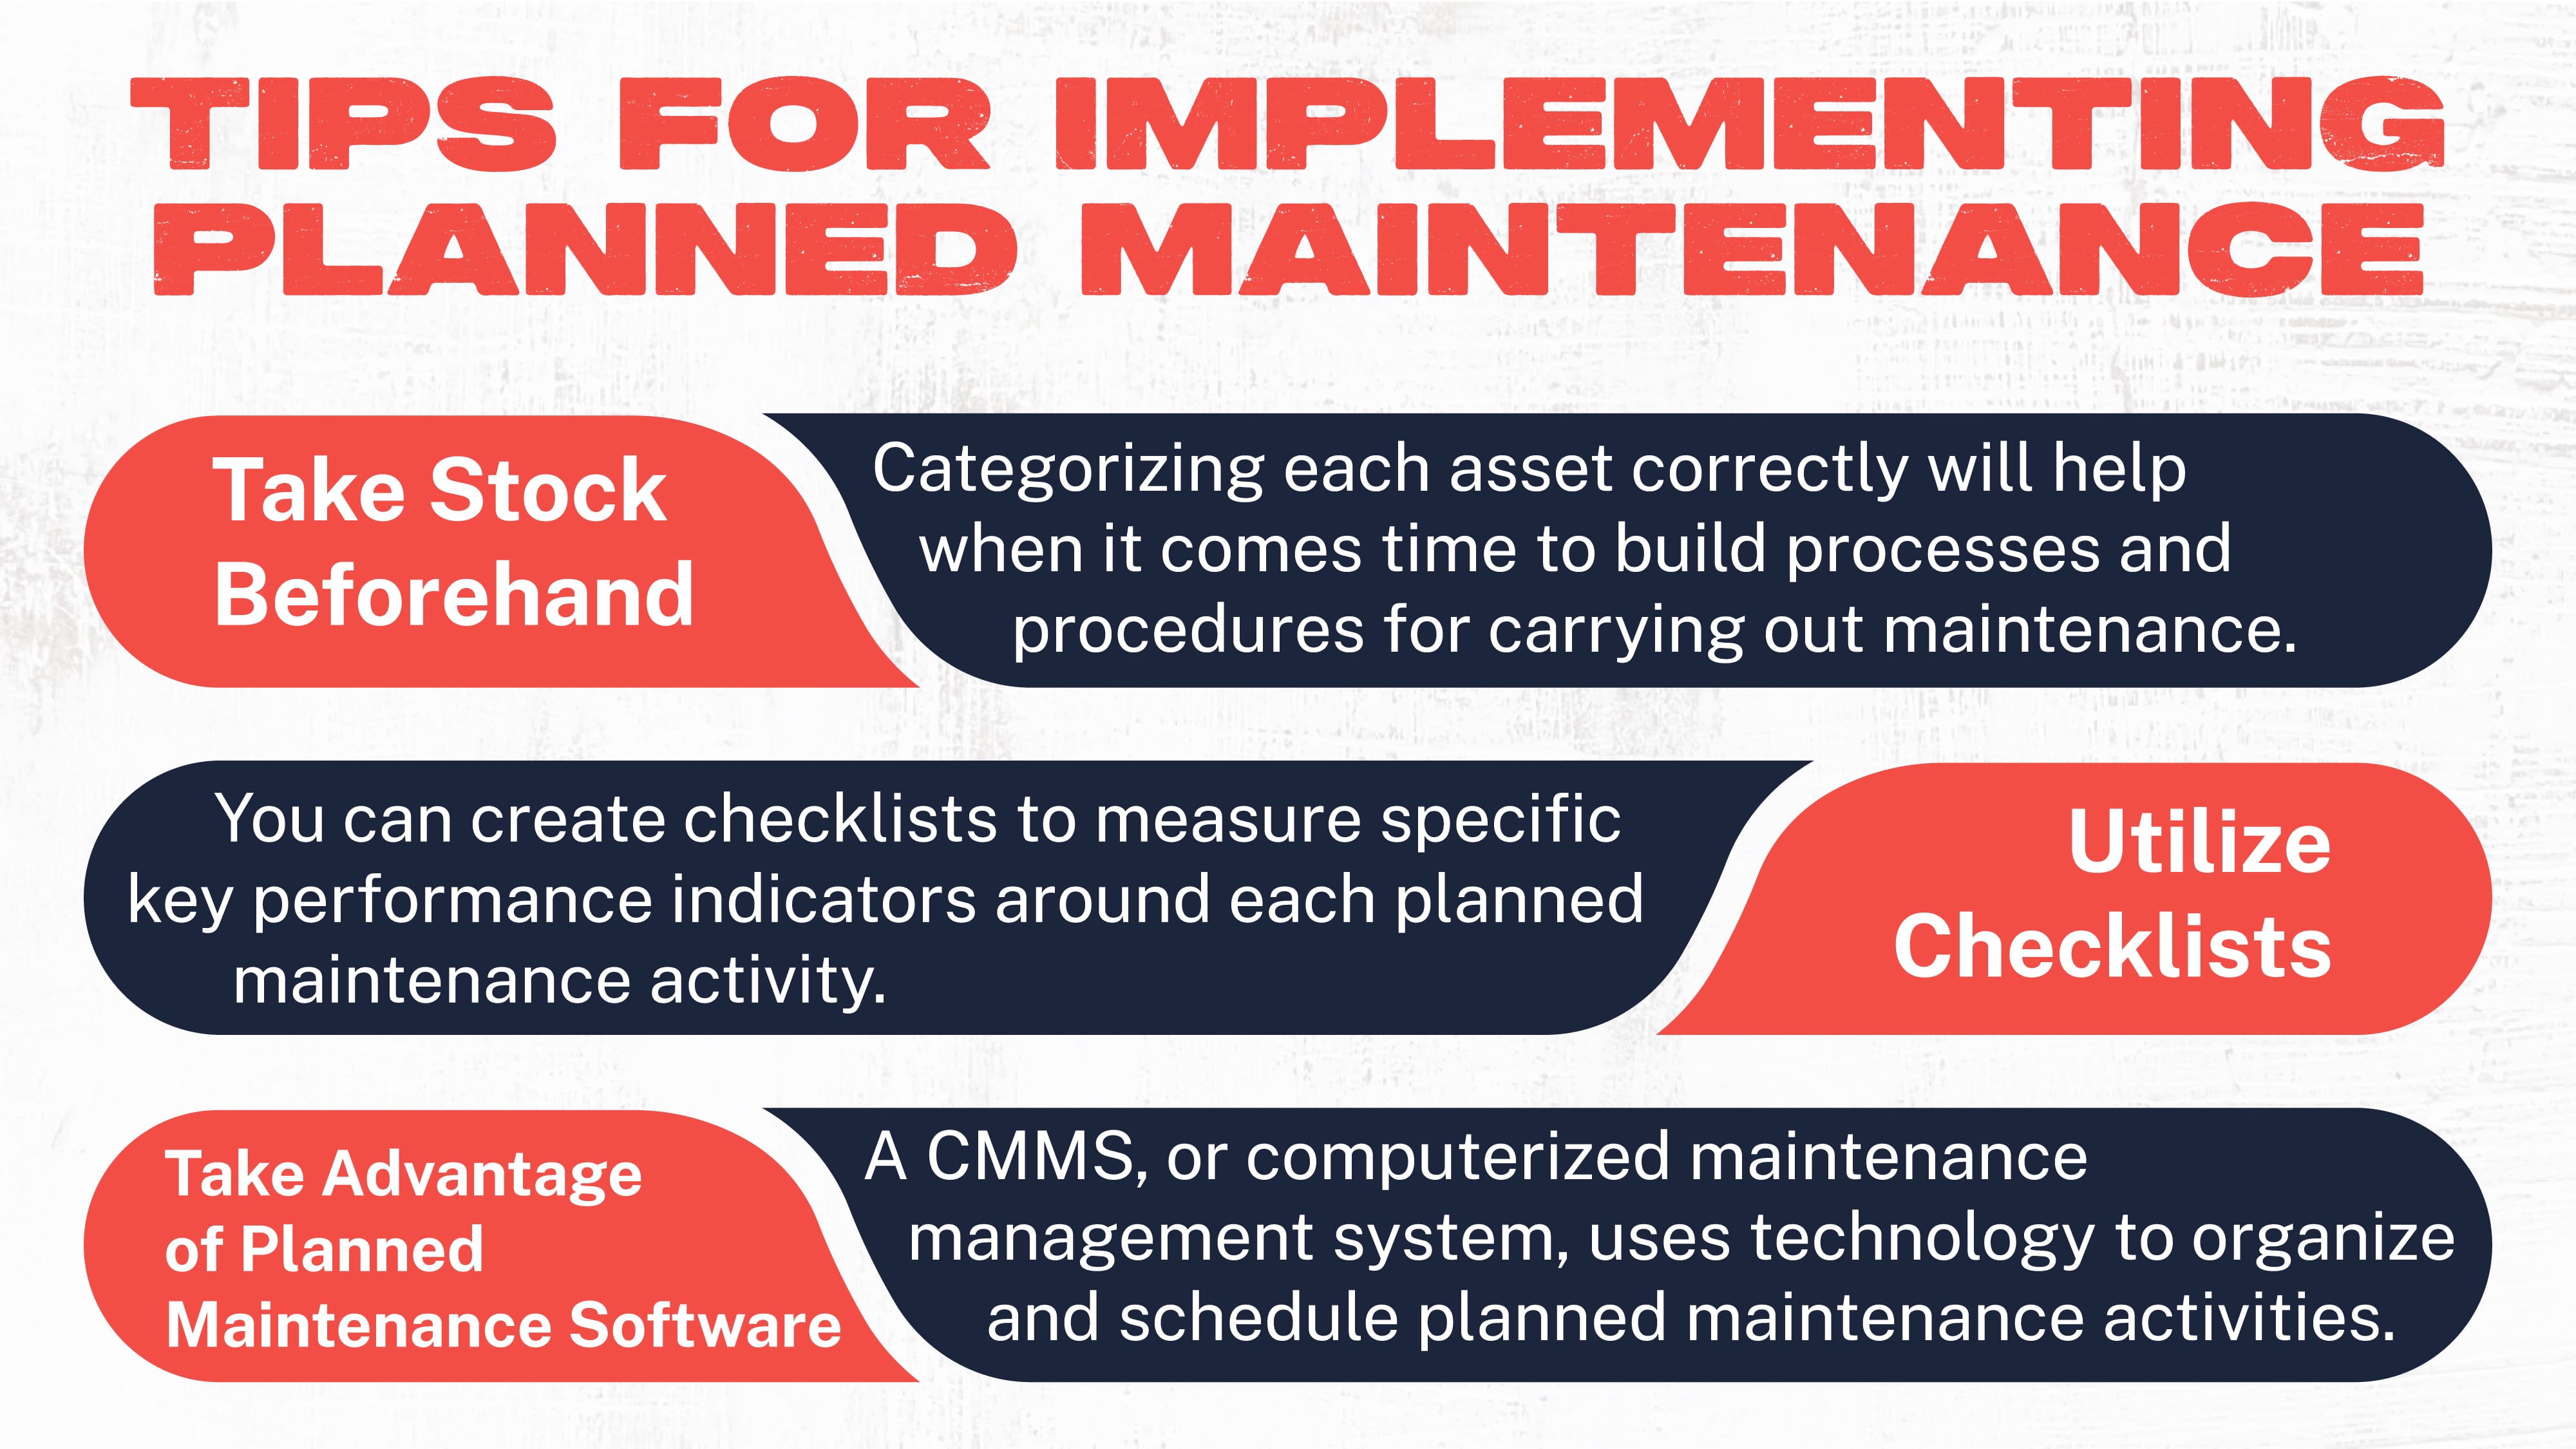 Tips for Implementing Planned Maintenance